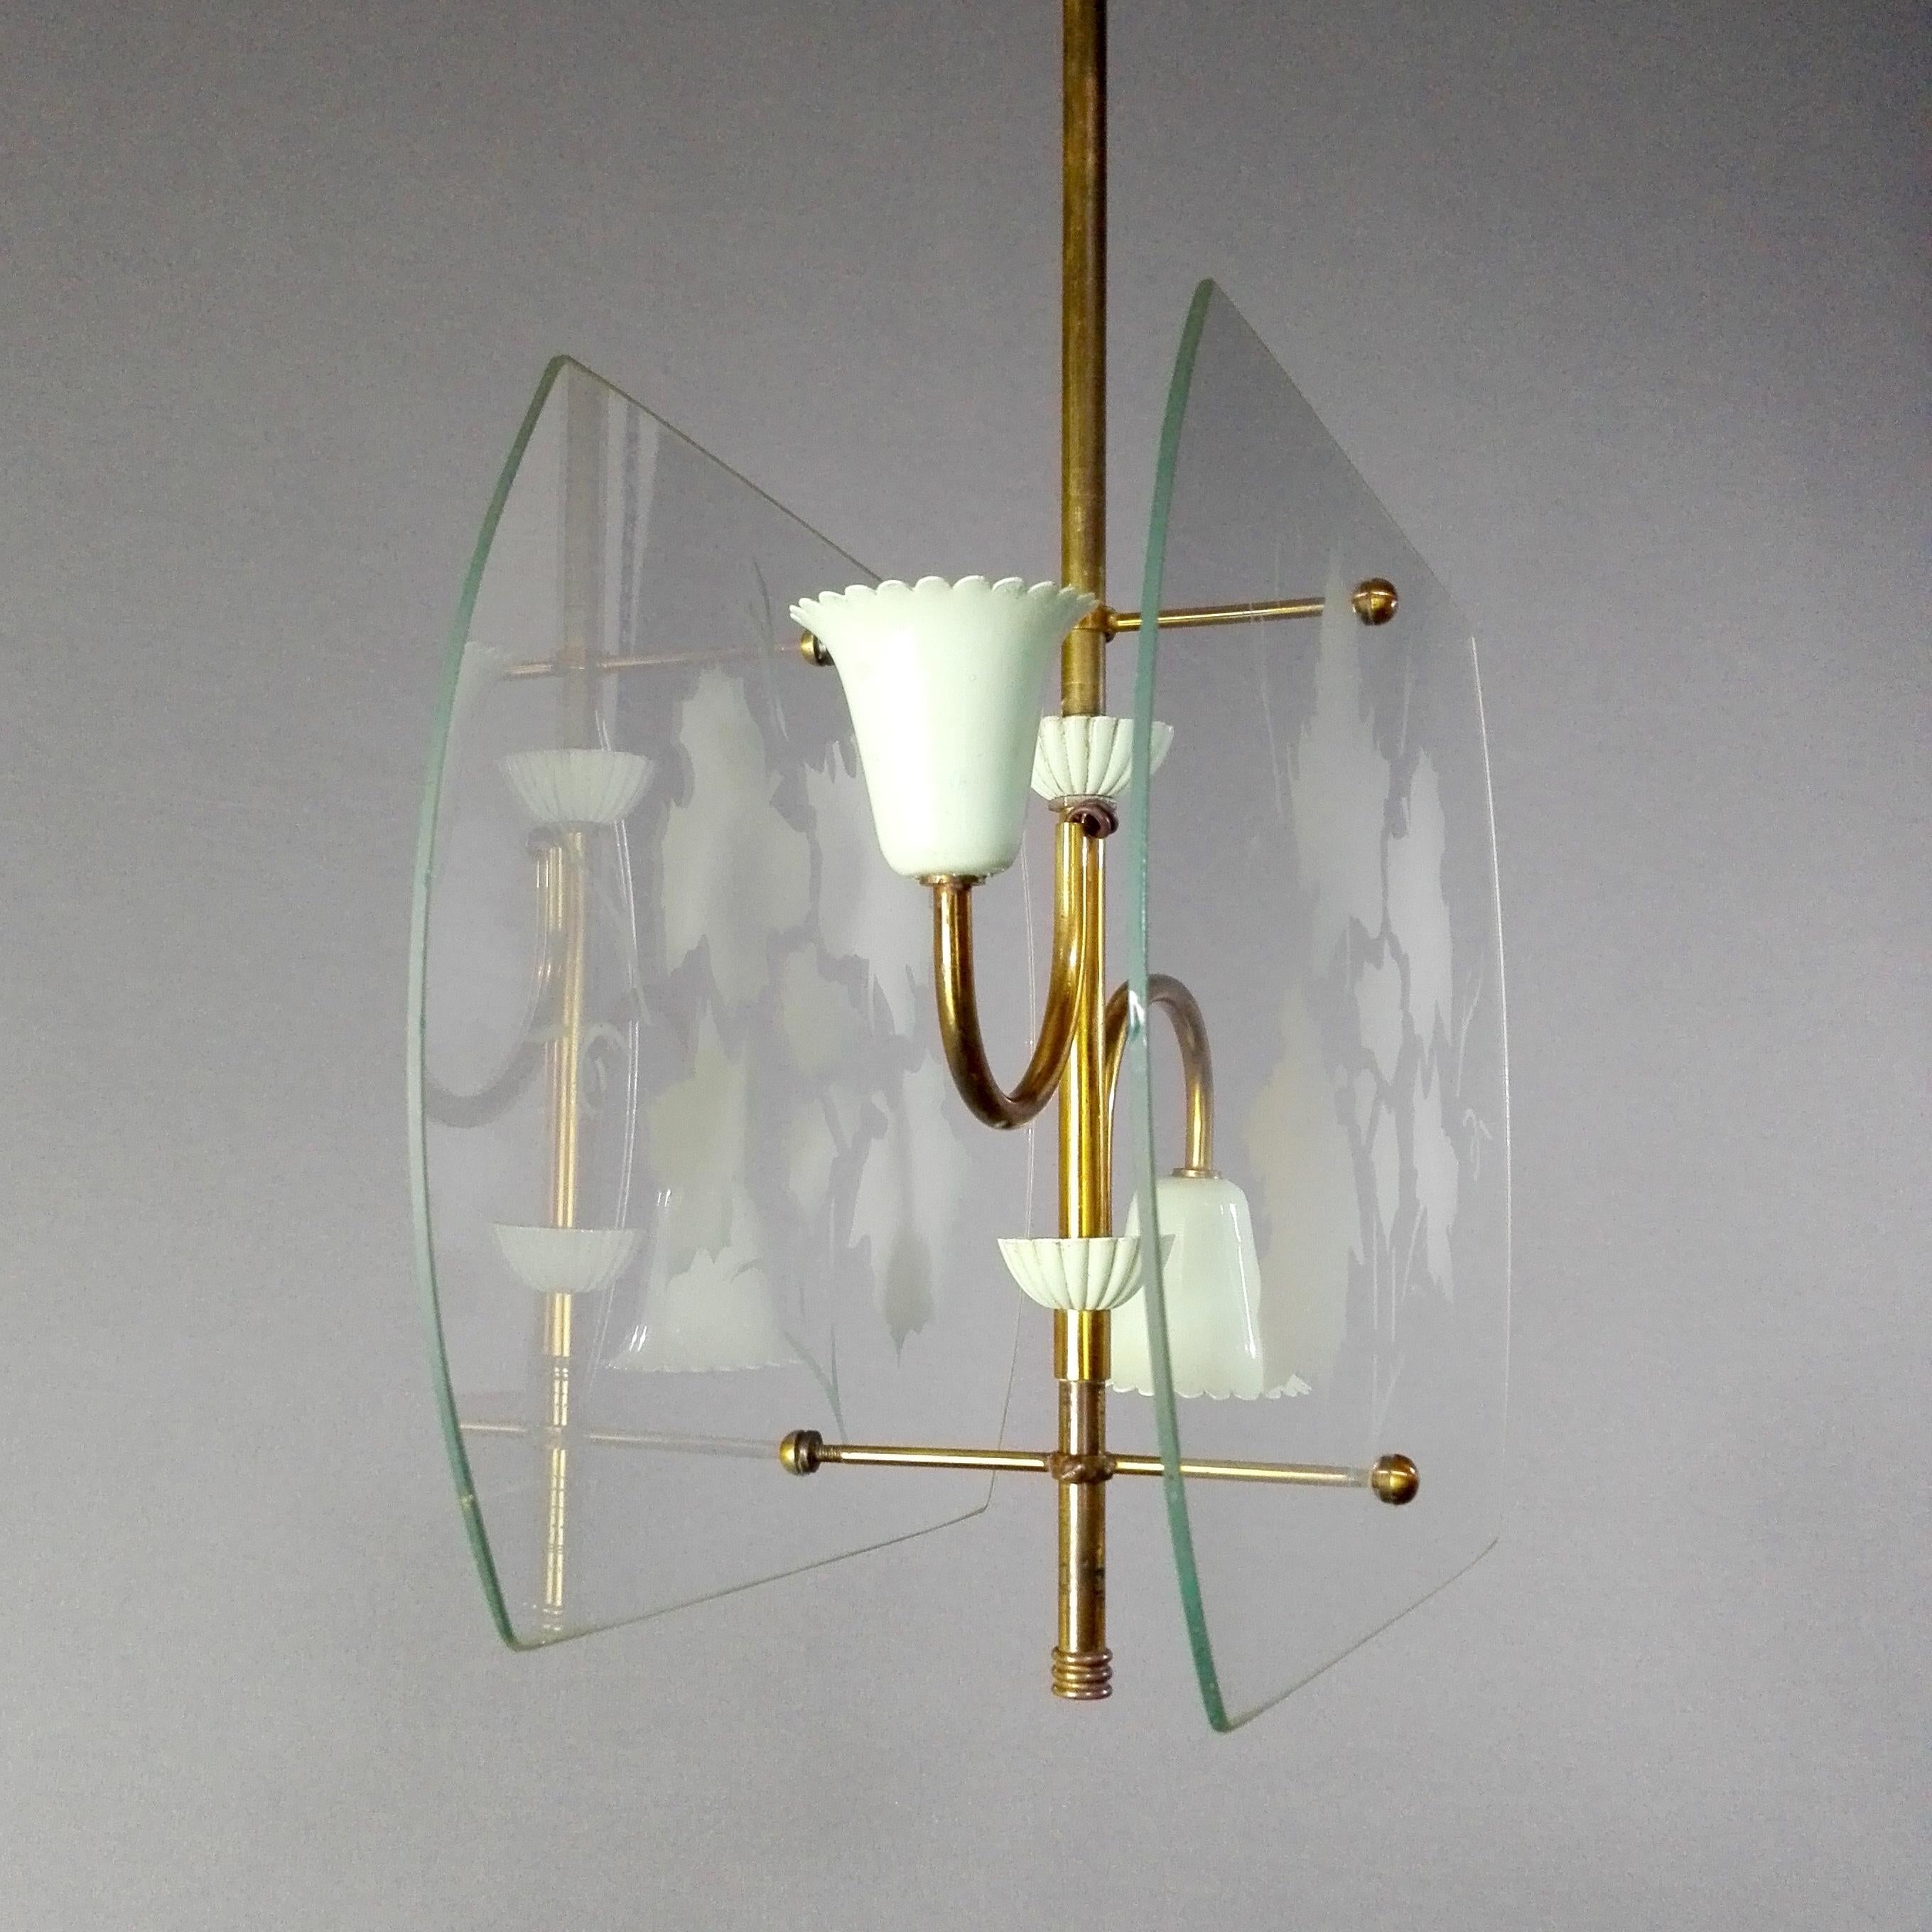 Pietro Chiesa Style 1940s Glass and Brass Two-Light Lantern In Good Condition For Sale In Caprino Veronese, VR